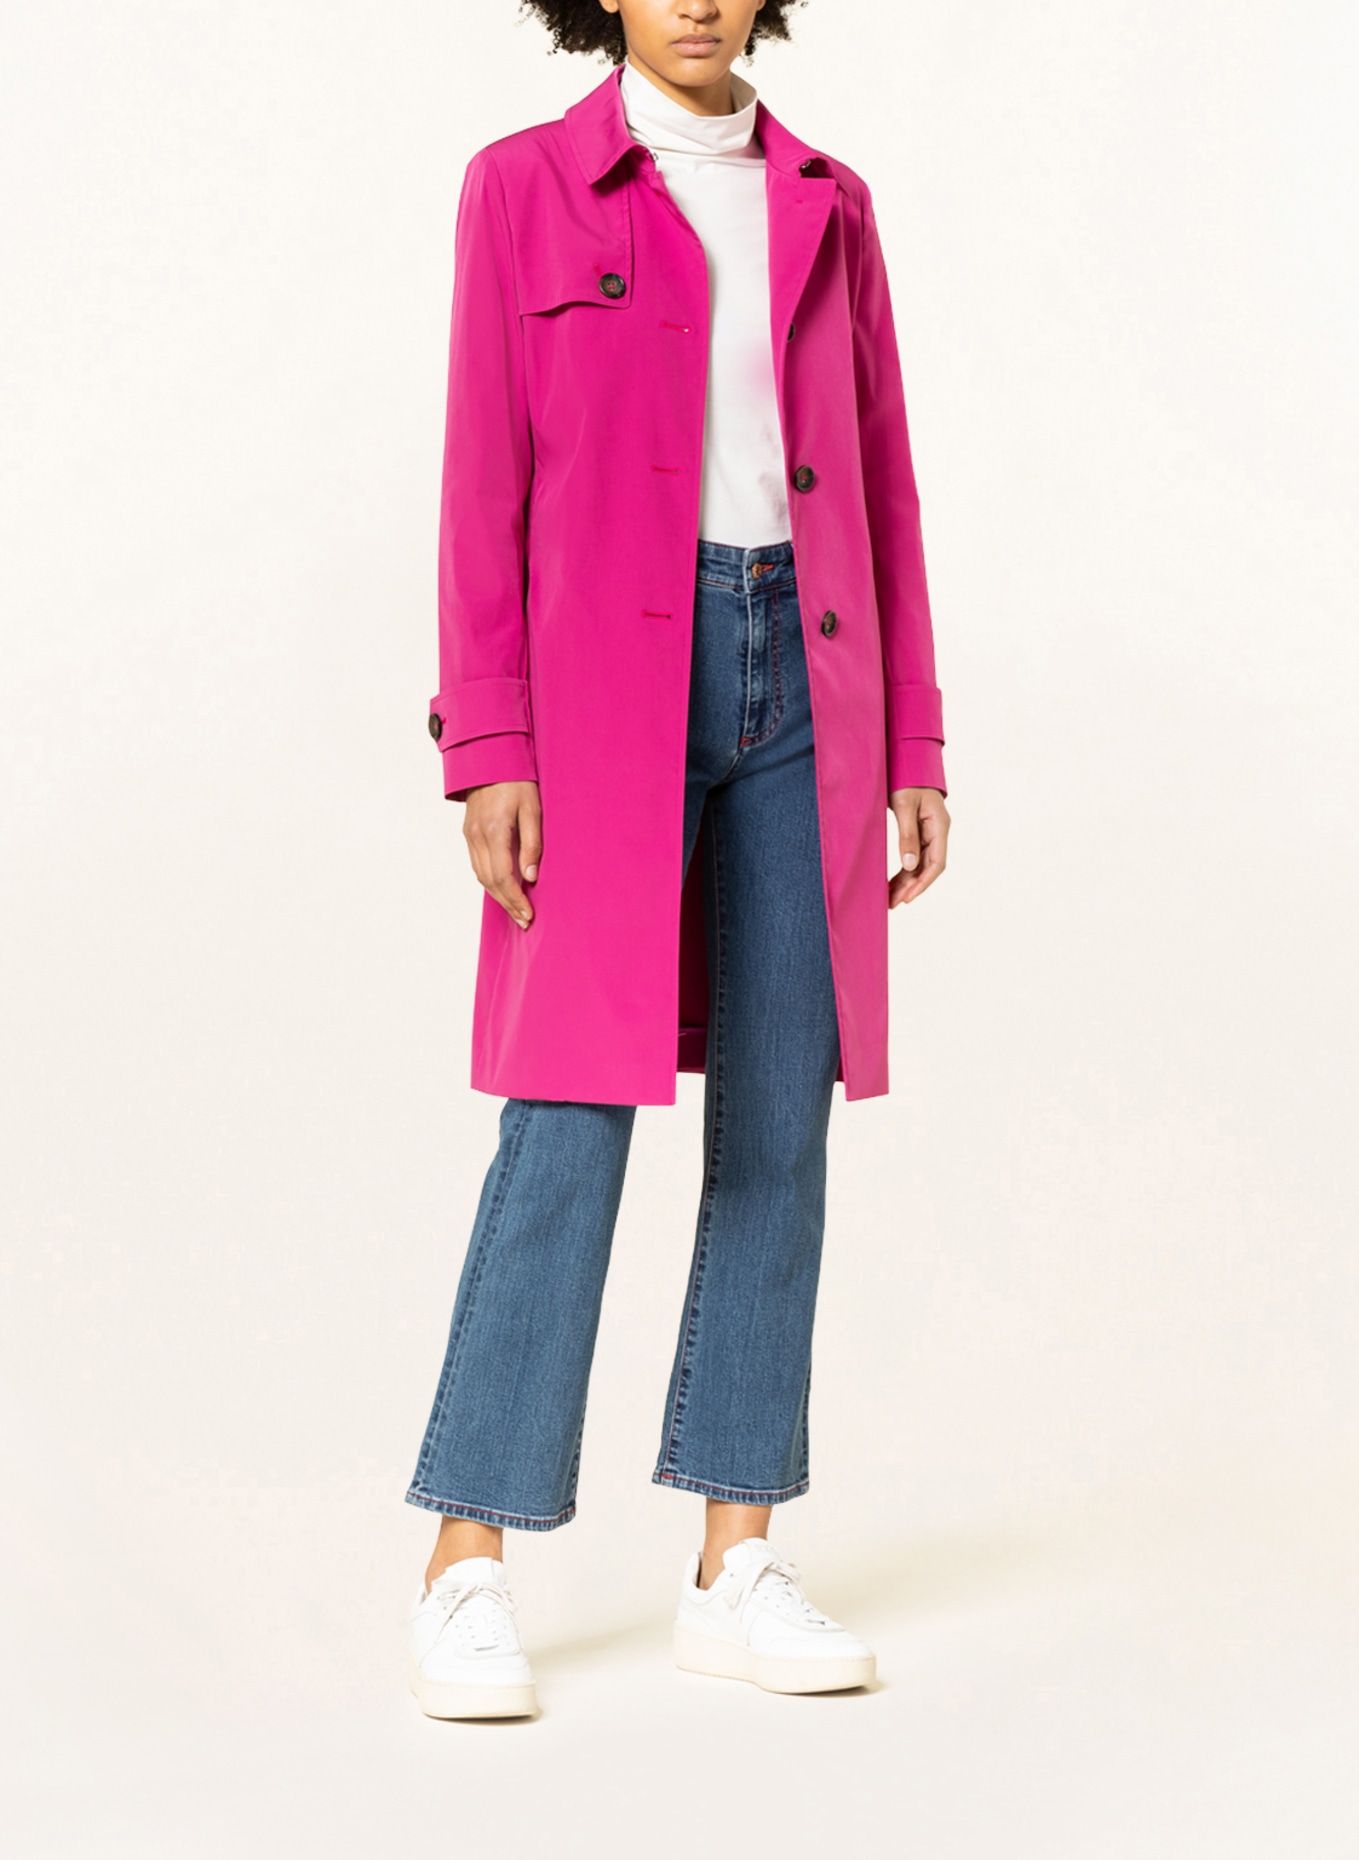 ICONS CINZIA ROCCA Trench coat, Color: PINK (Image 2)